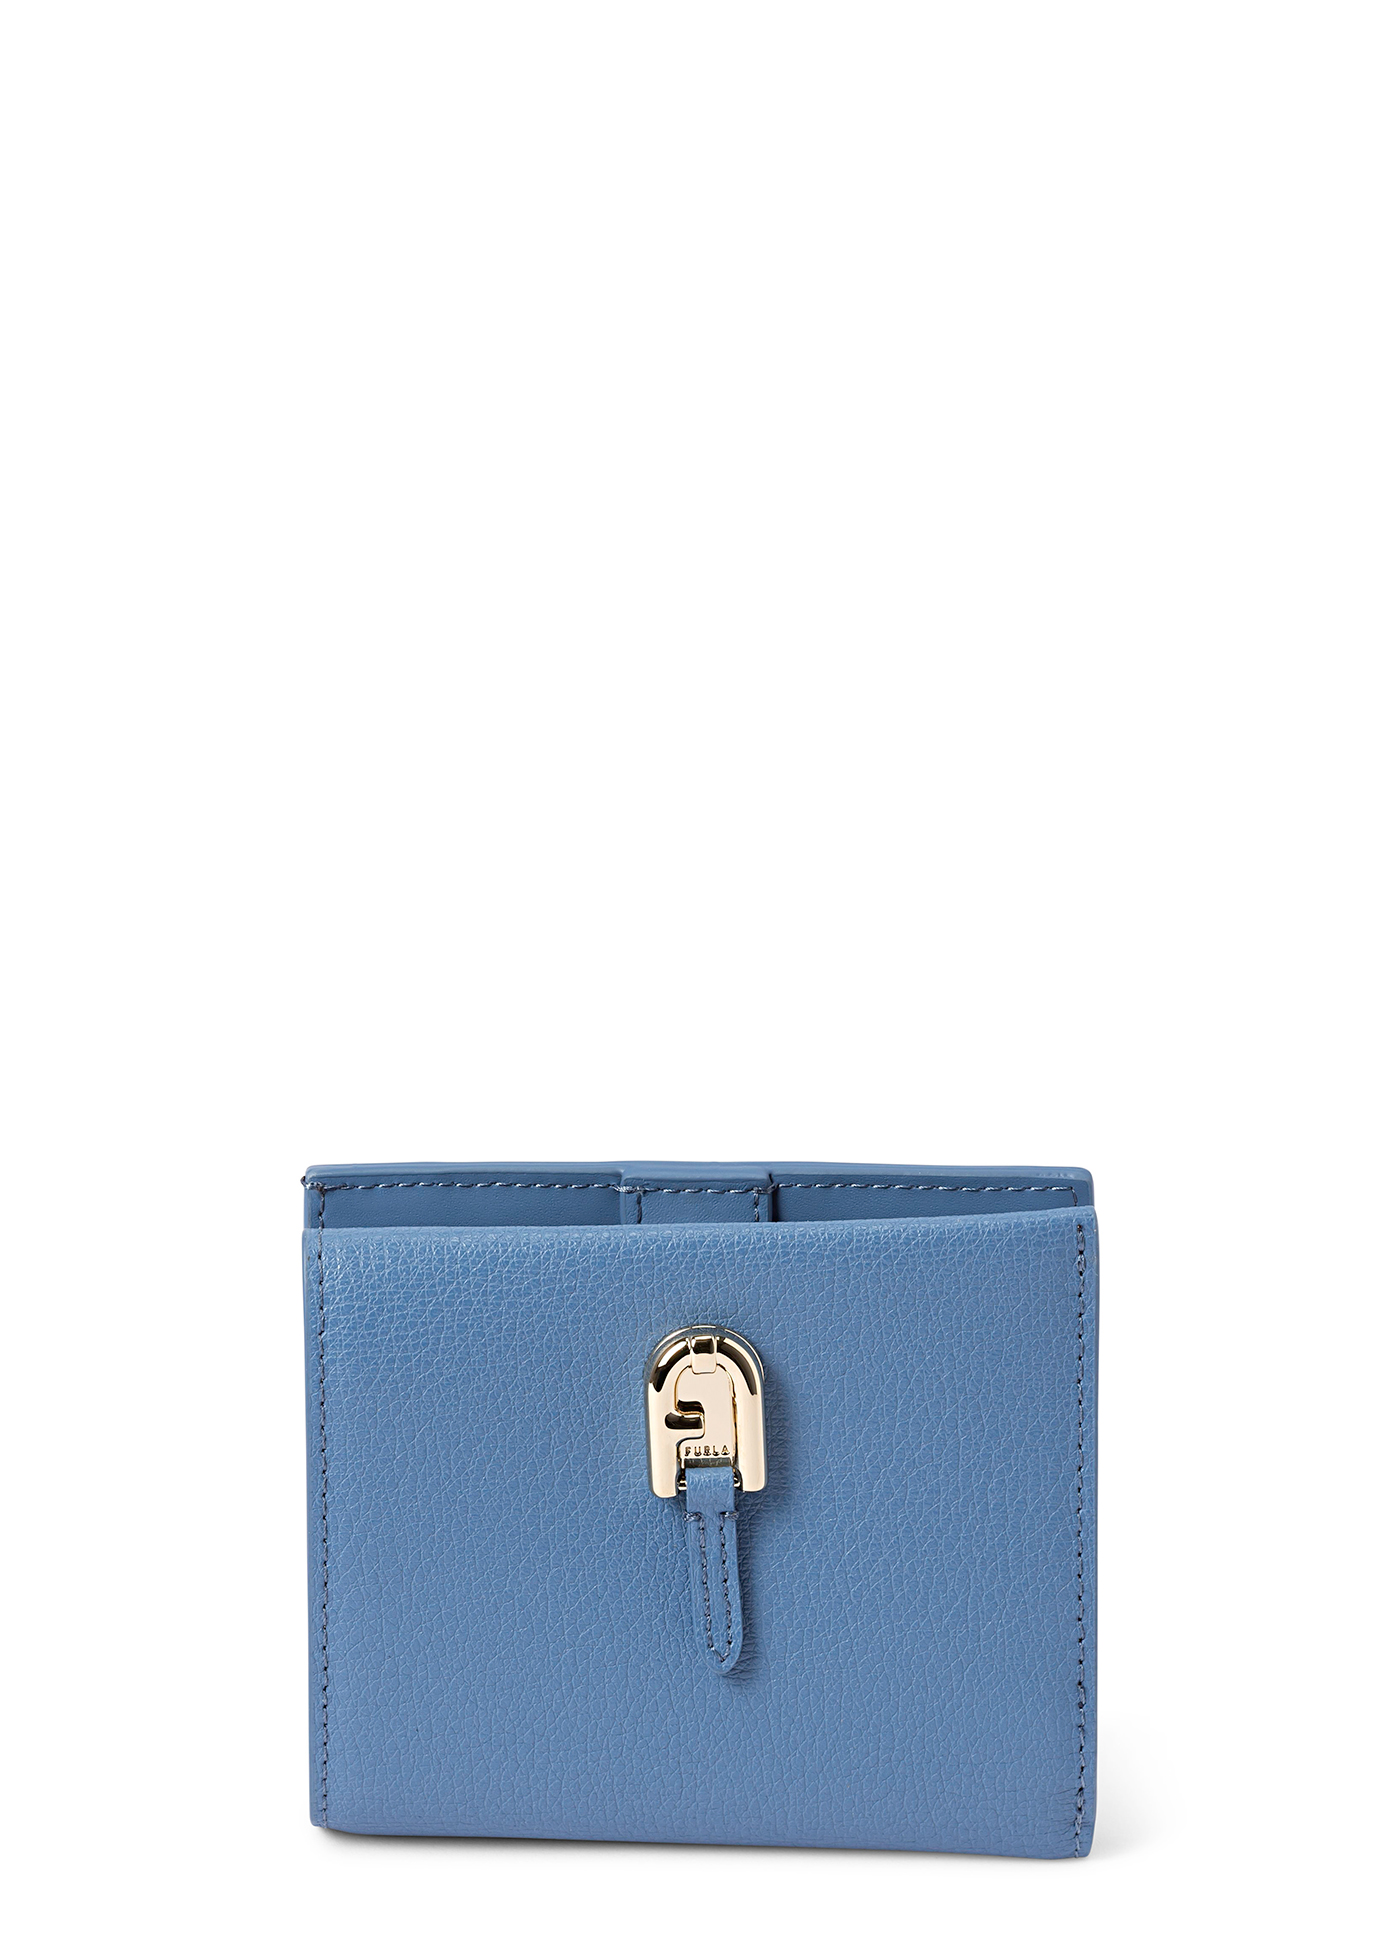 FURLA PALAZZO S COMPACT WALLET image number 0